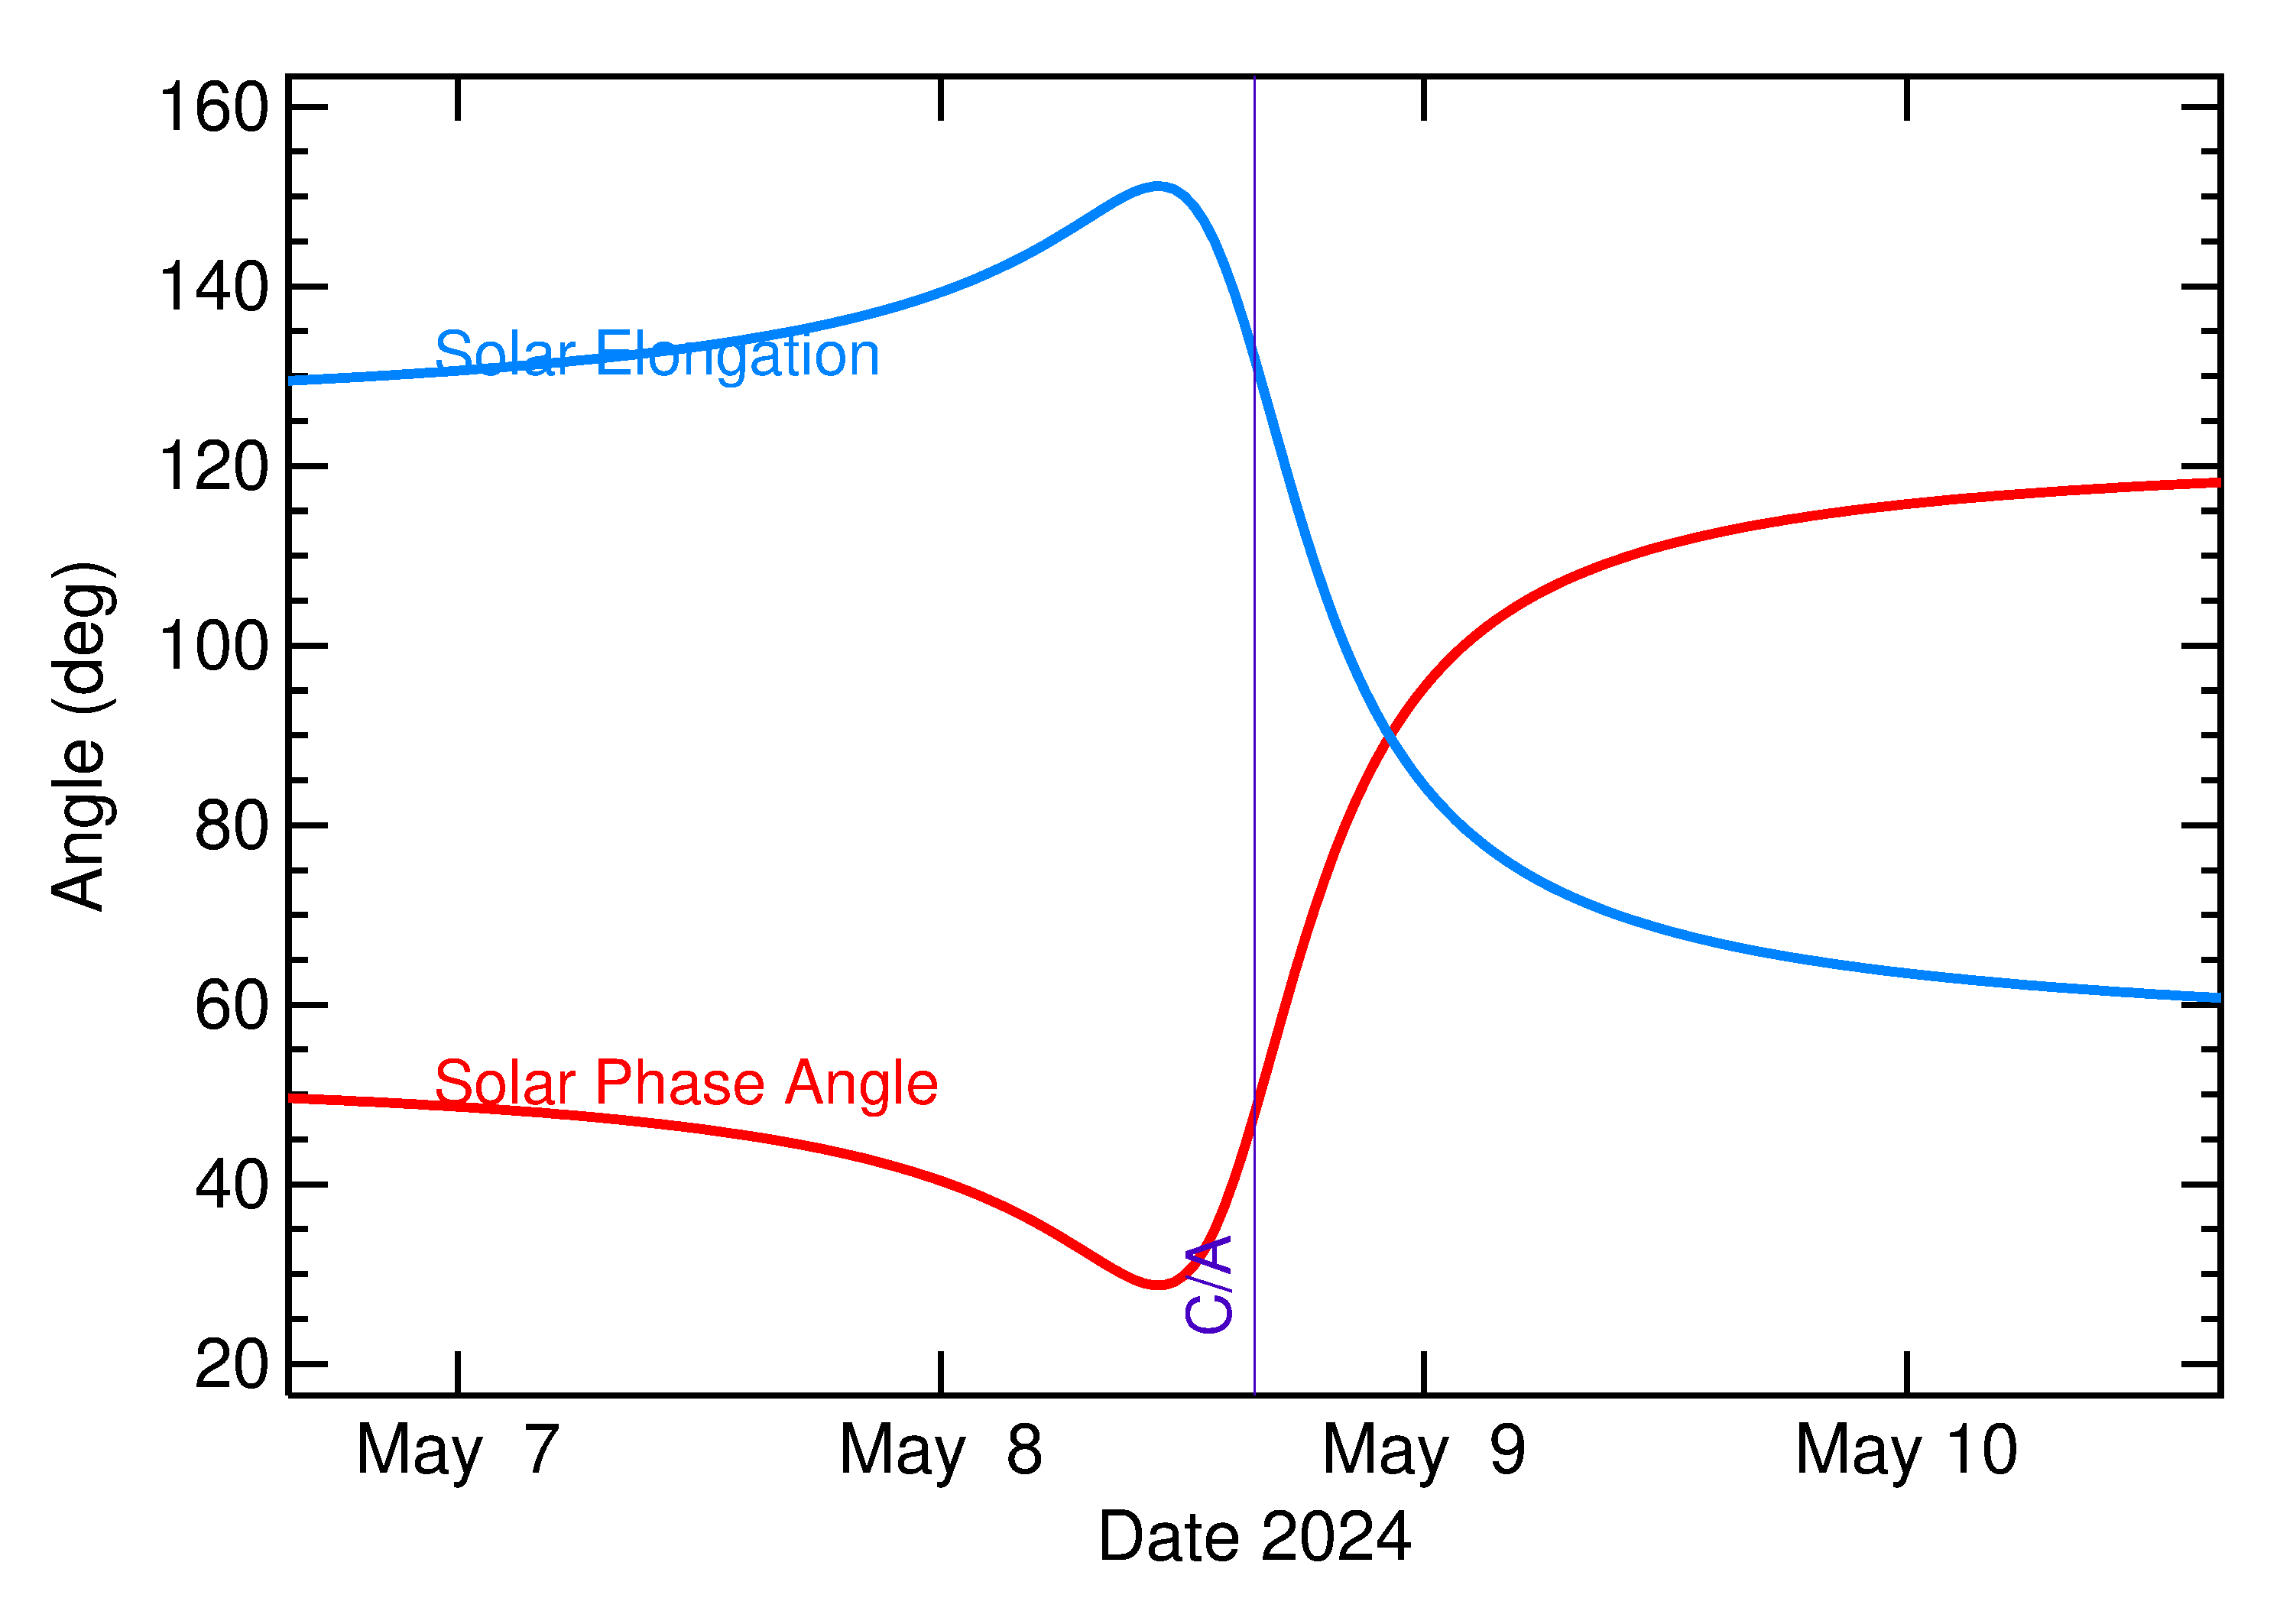 Solar Elongation and Solar Phase Angle of 2024 JL3 in the days around closest approach